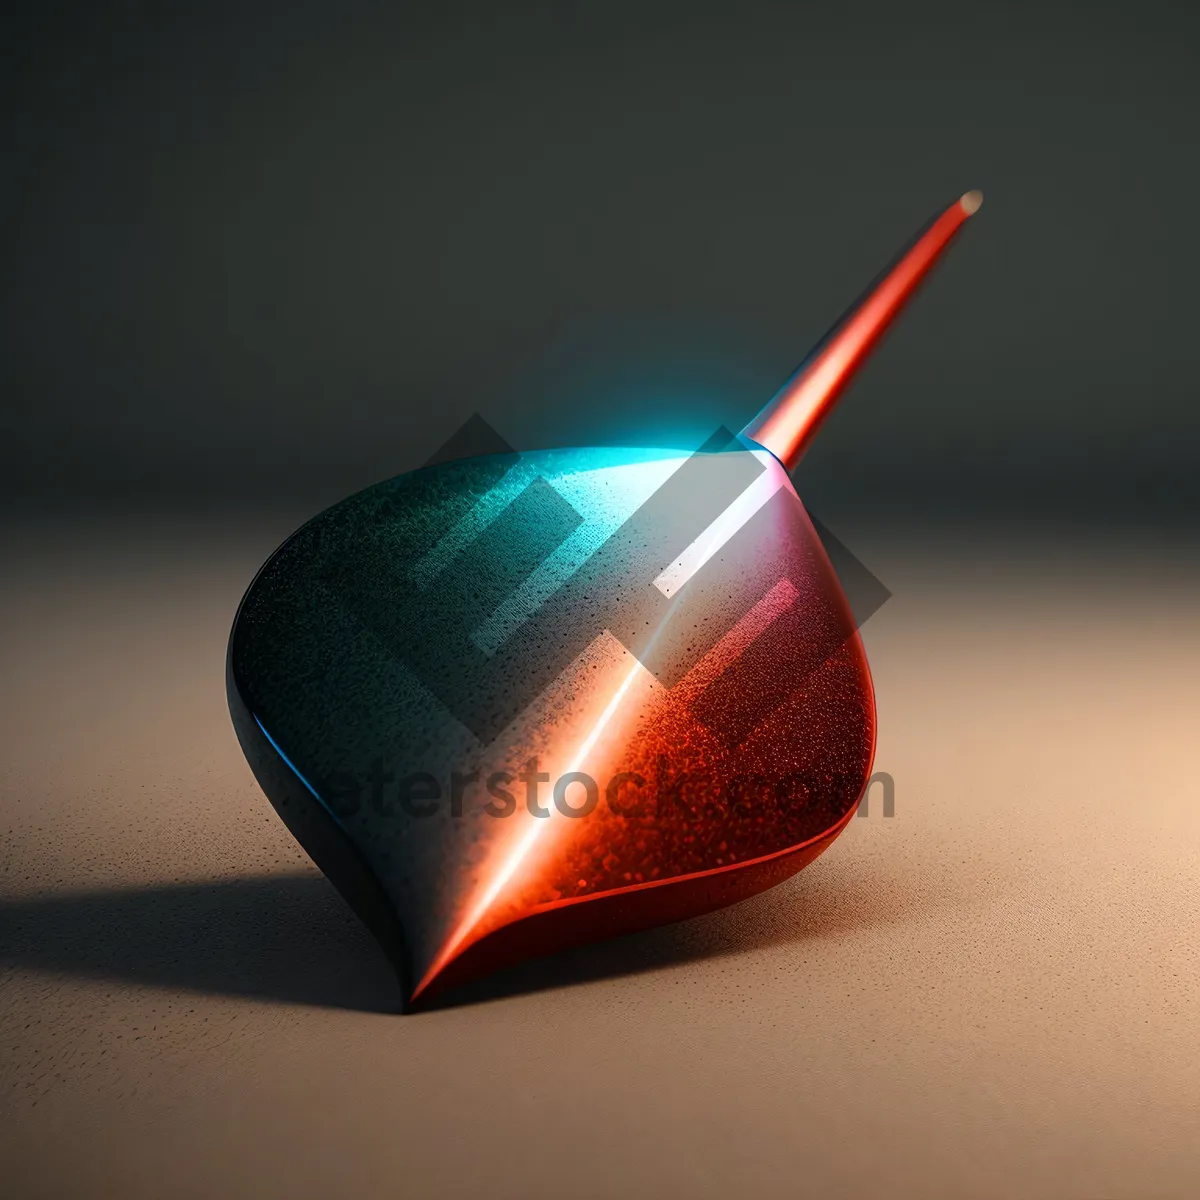 Picture of Tech Mouse with Thumbtack - Electronic Device